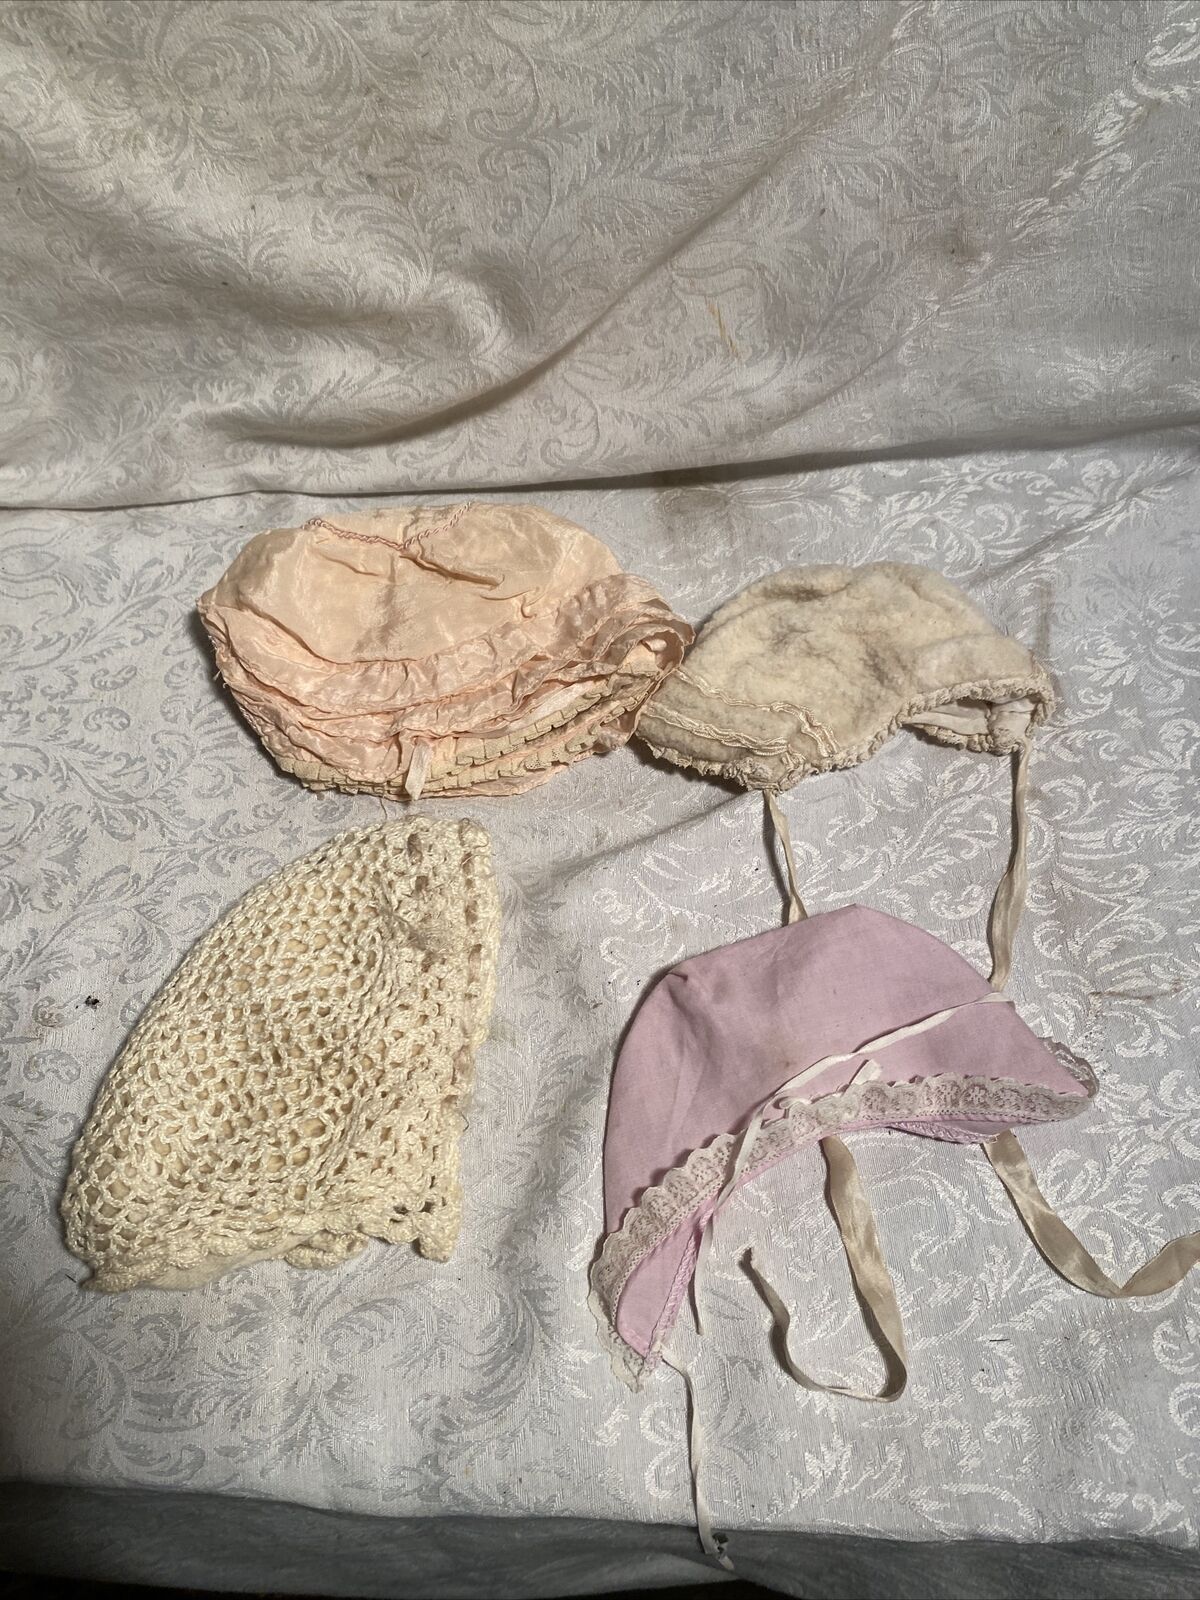 Vintage Lace Baby Or Doll Bonnet Cap Hat Christening Lot Of 4 #1